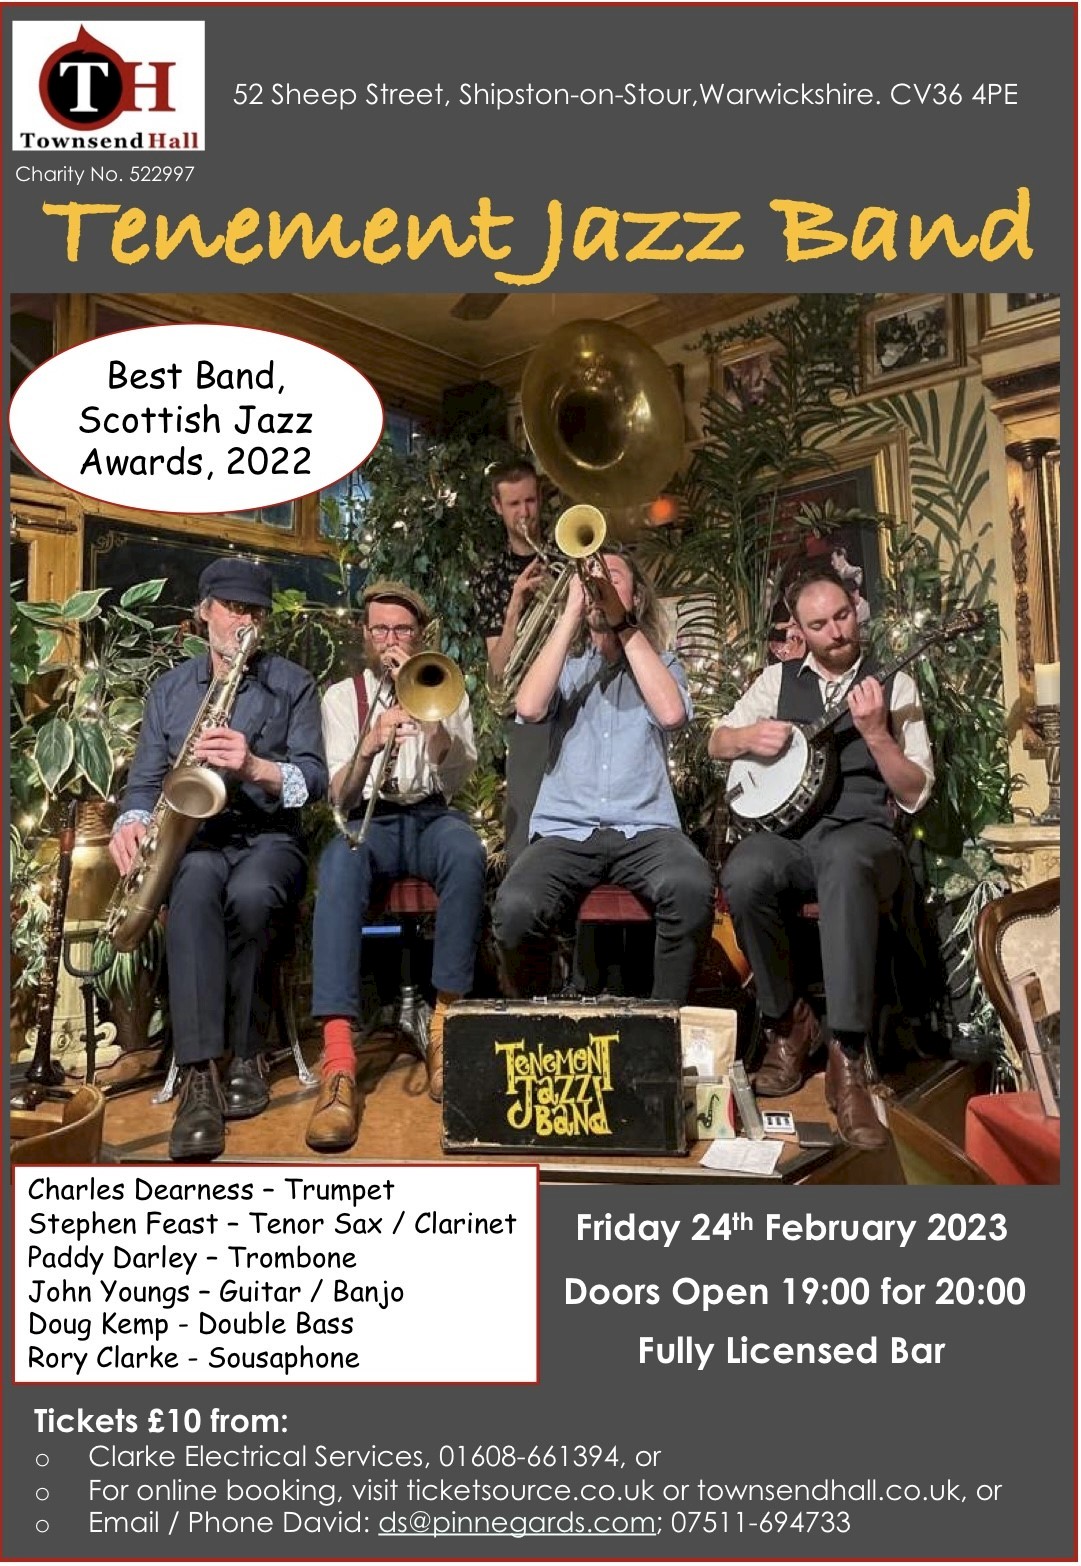 Tenement Jazz Band at Townsend Hall Friday 24 February